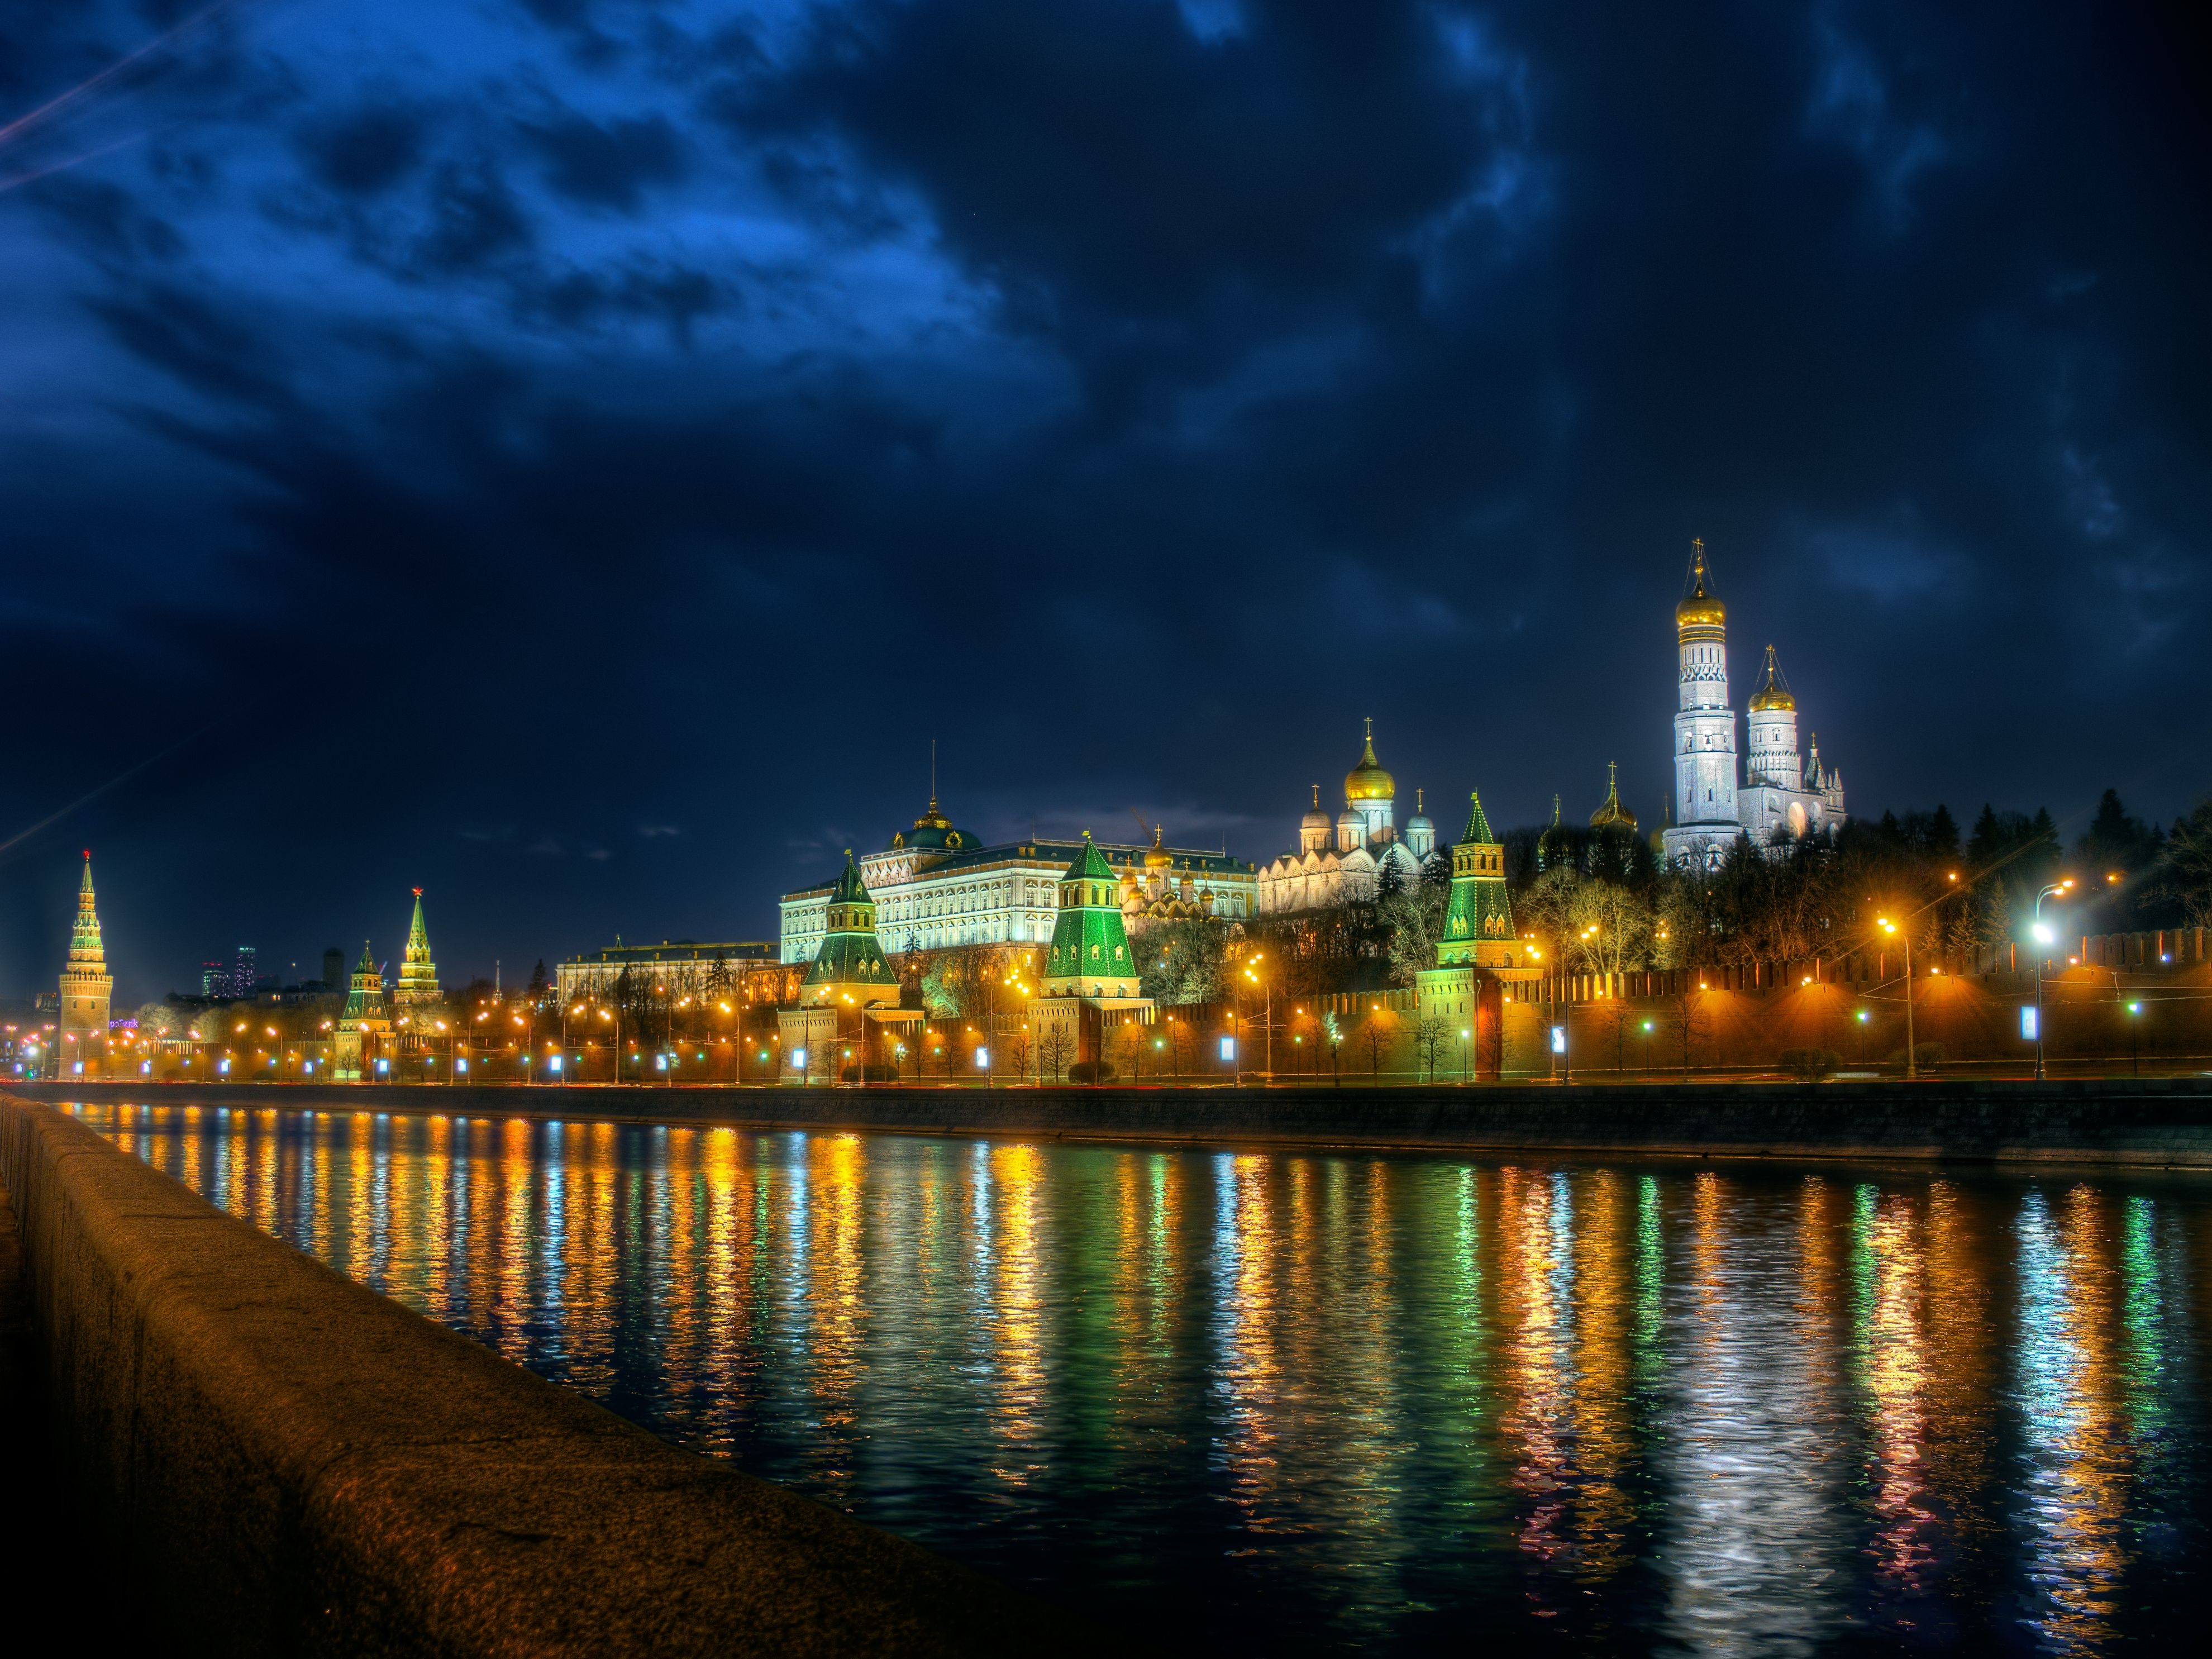 Building Hdr Light Moscow Night Reflection River 3960x2970